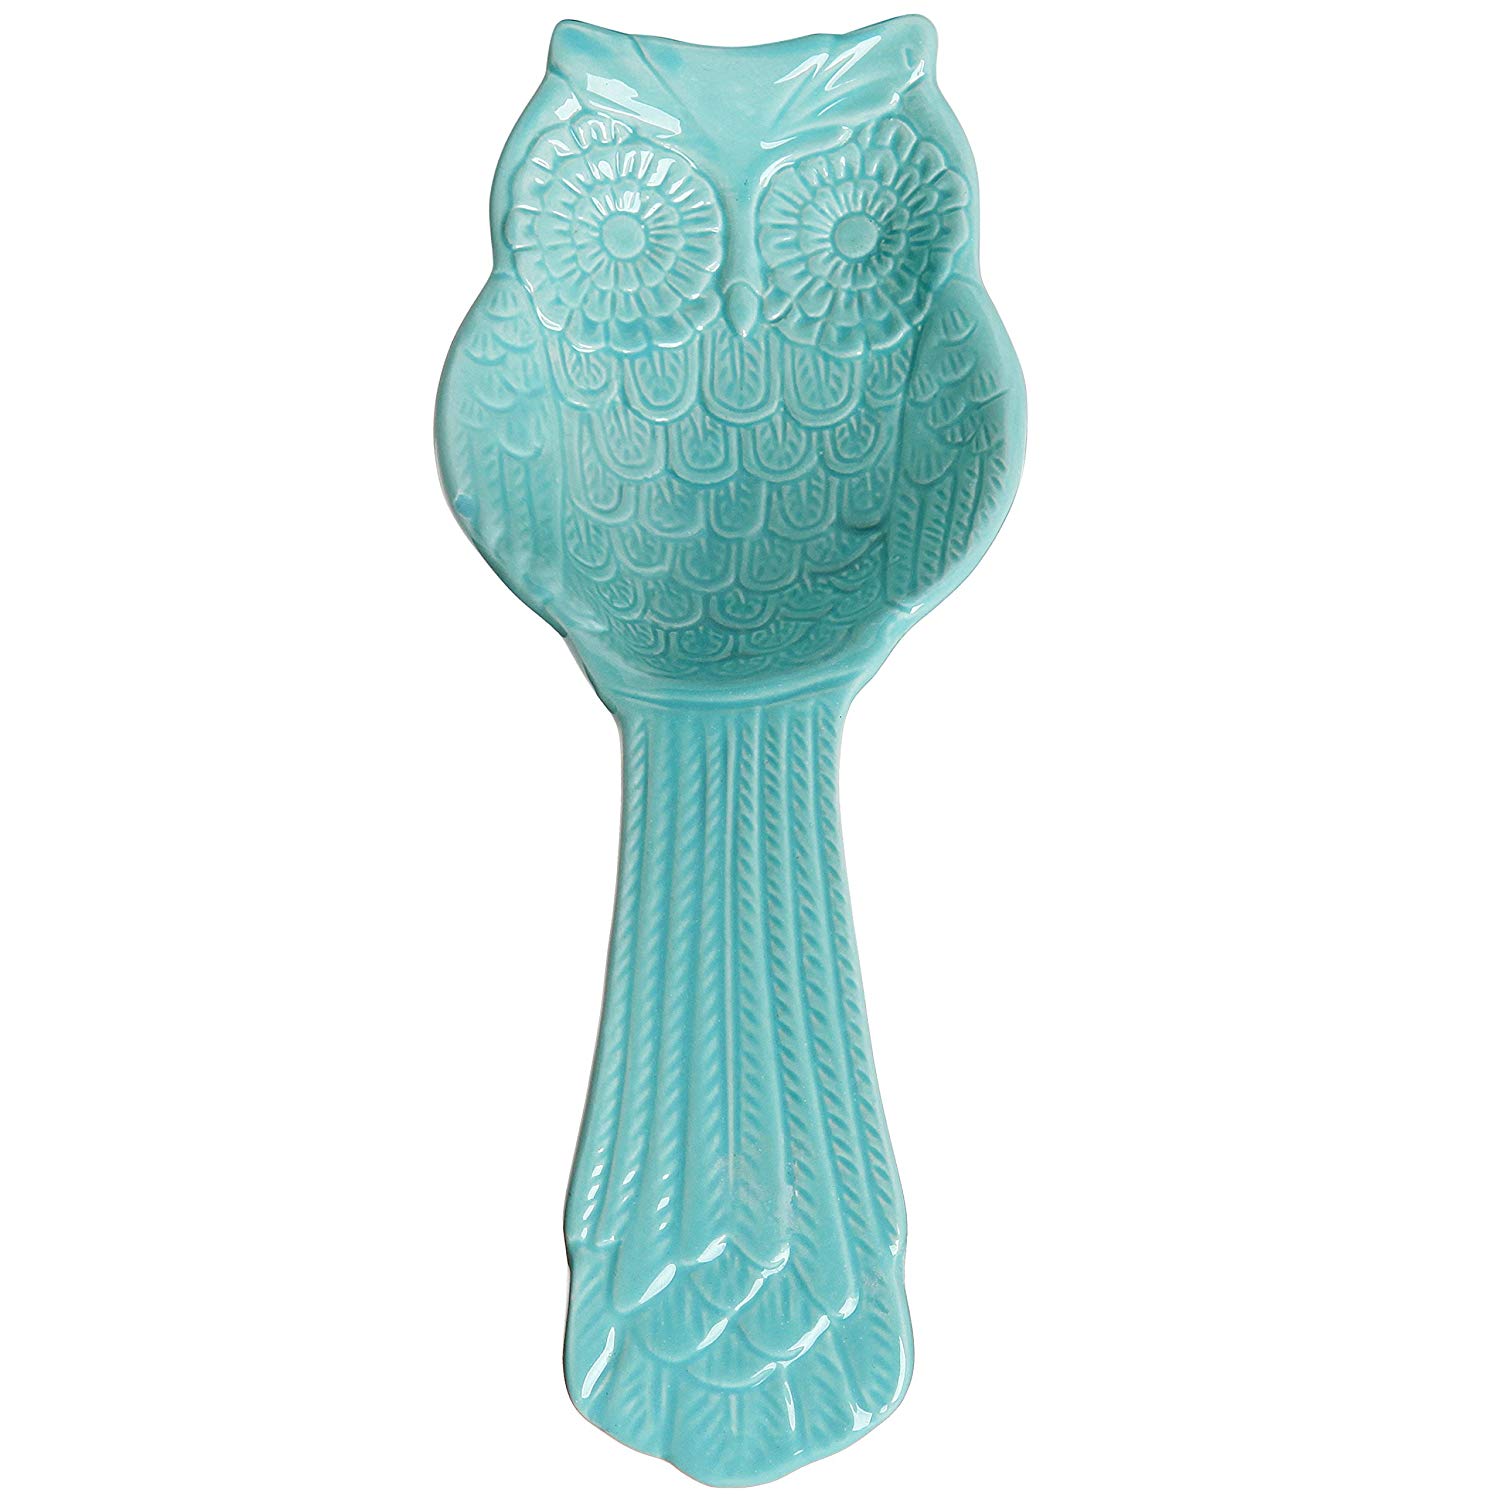 owl-gifts-spoon-rest